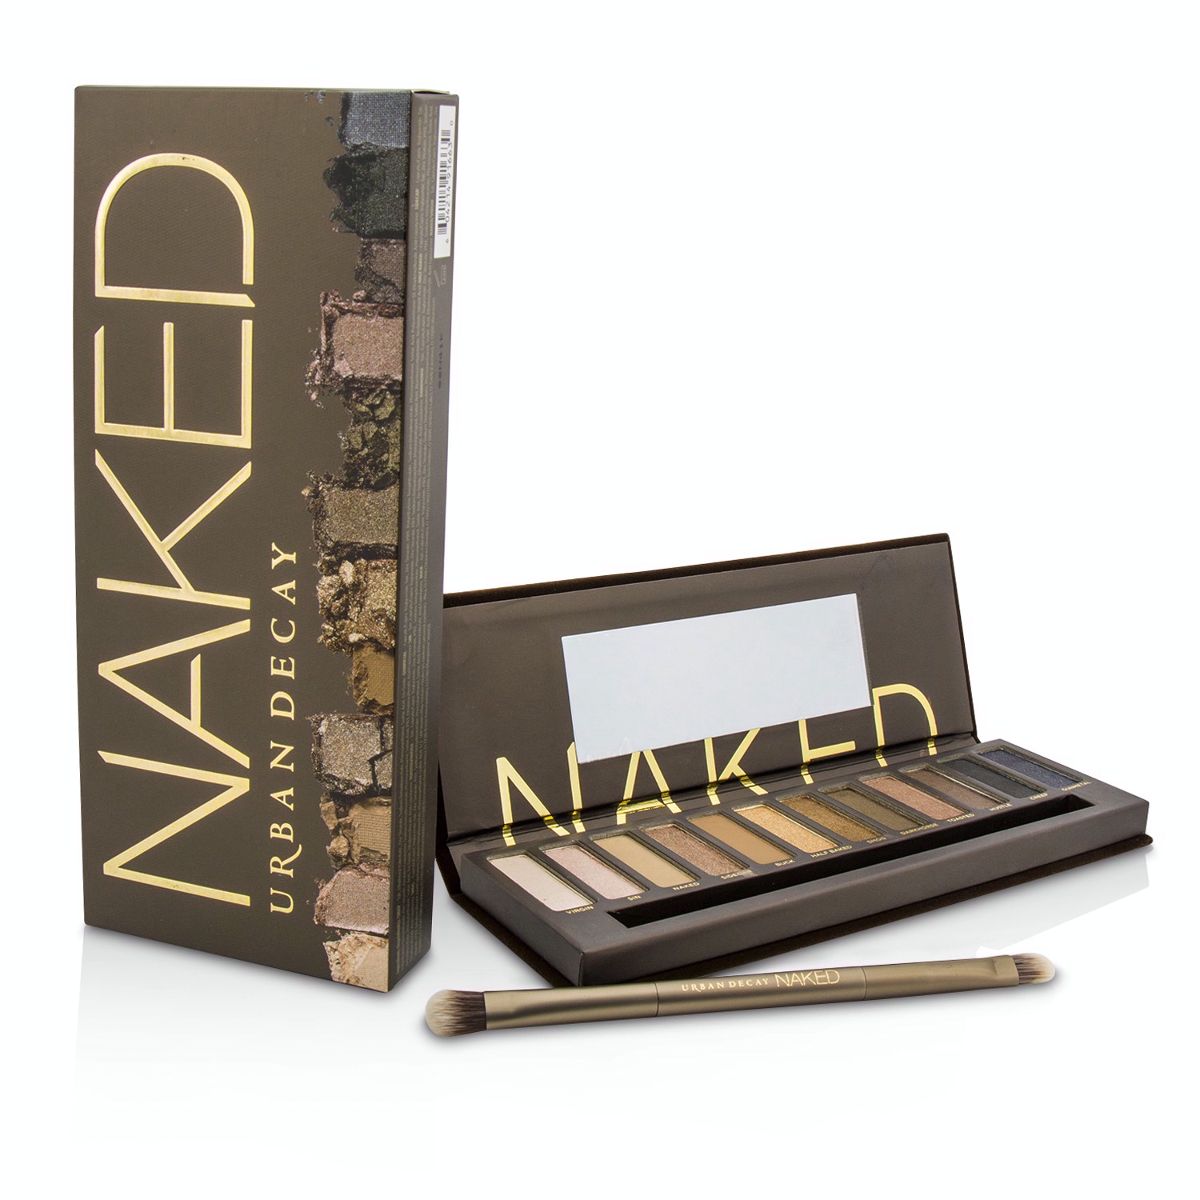 Naked Eyeshadow Palette: 12x Eyeshadow 1x Doubled Ended Shadow/Blending Brush Urban Decay Image